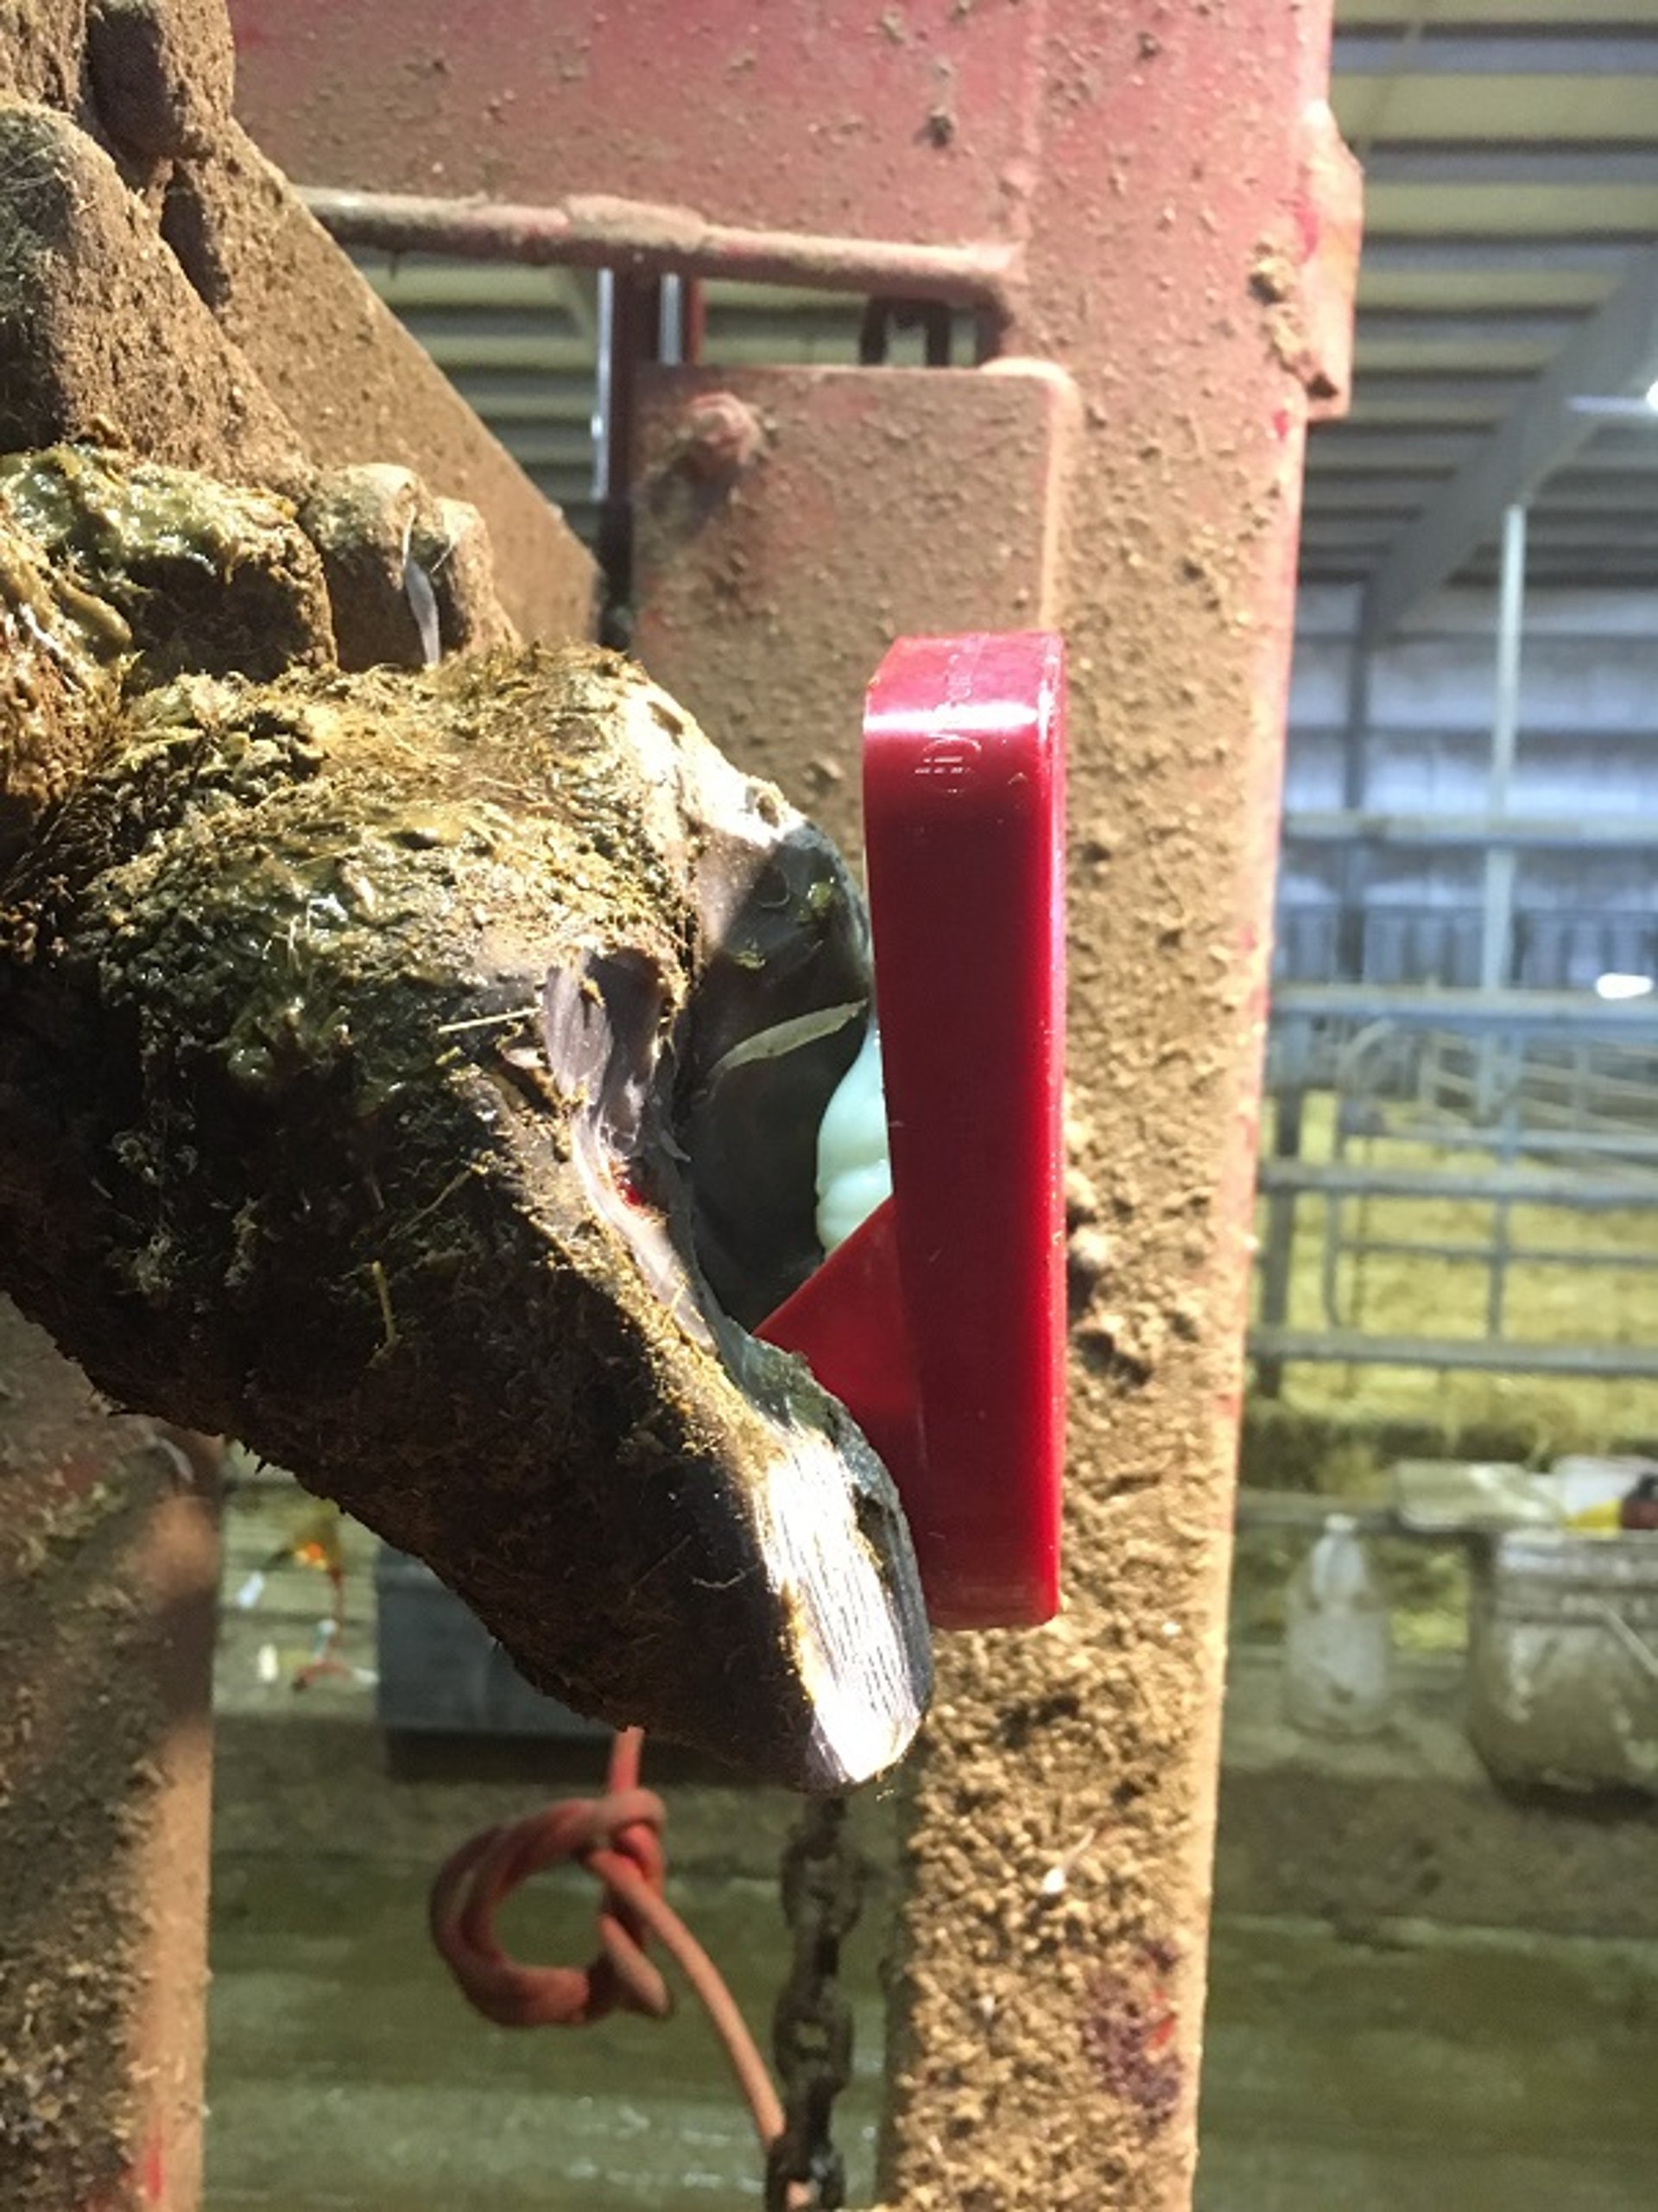 Block treatment of sole ulcer, cow